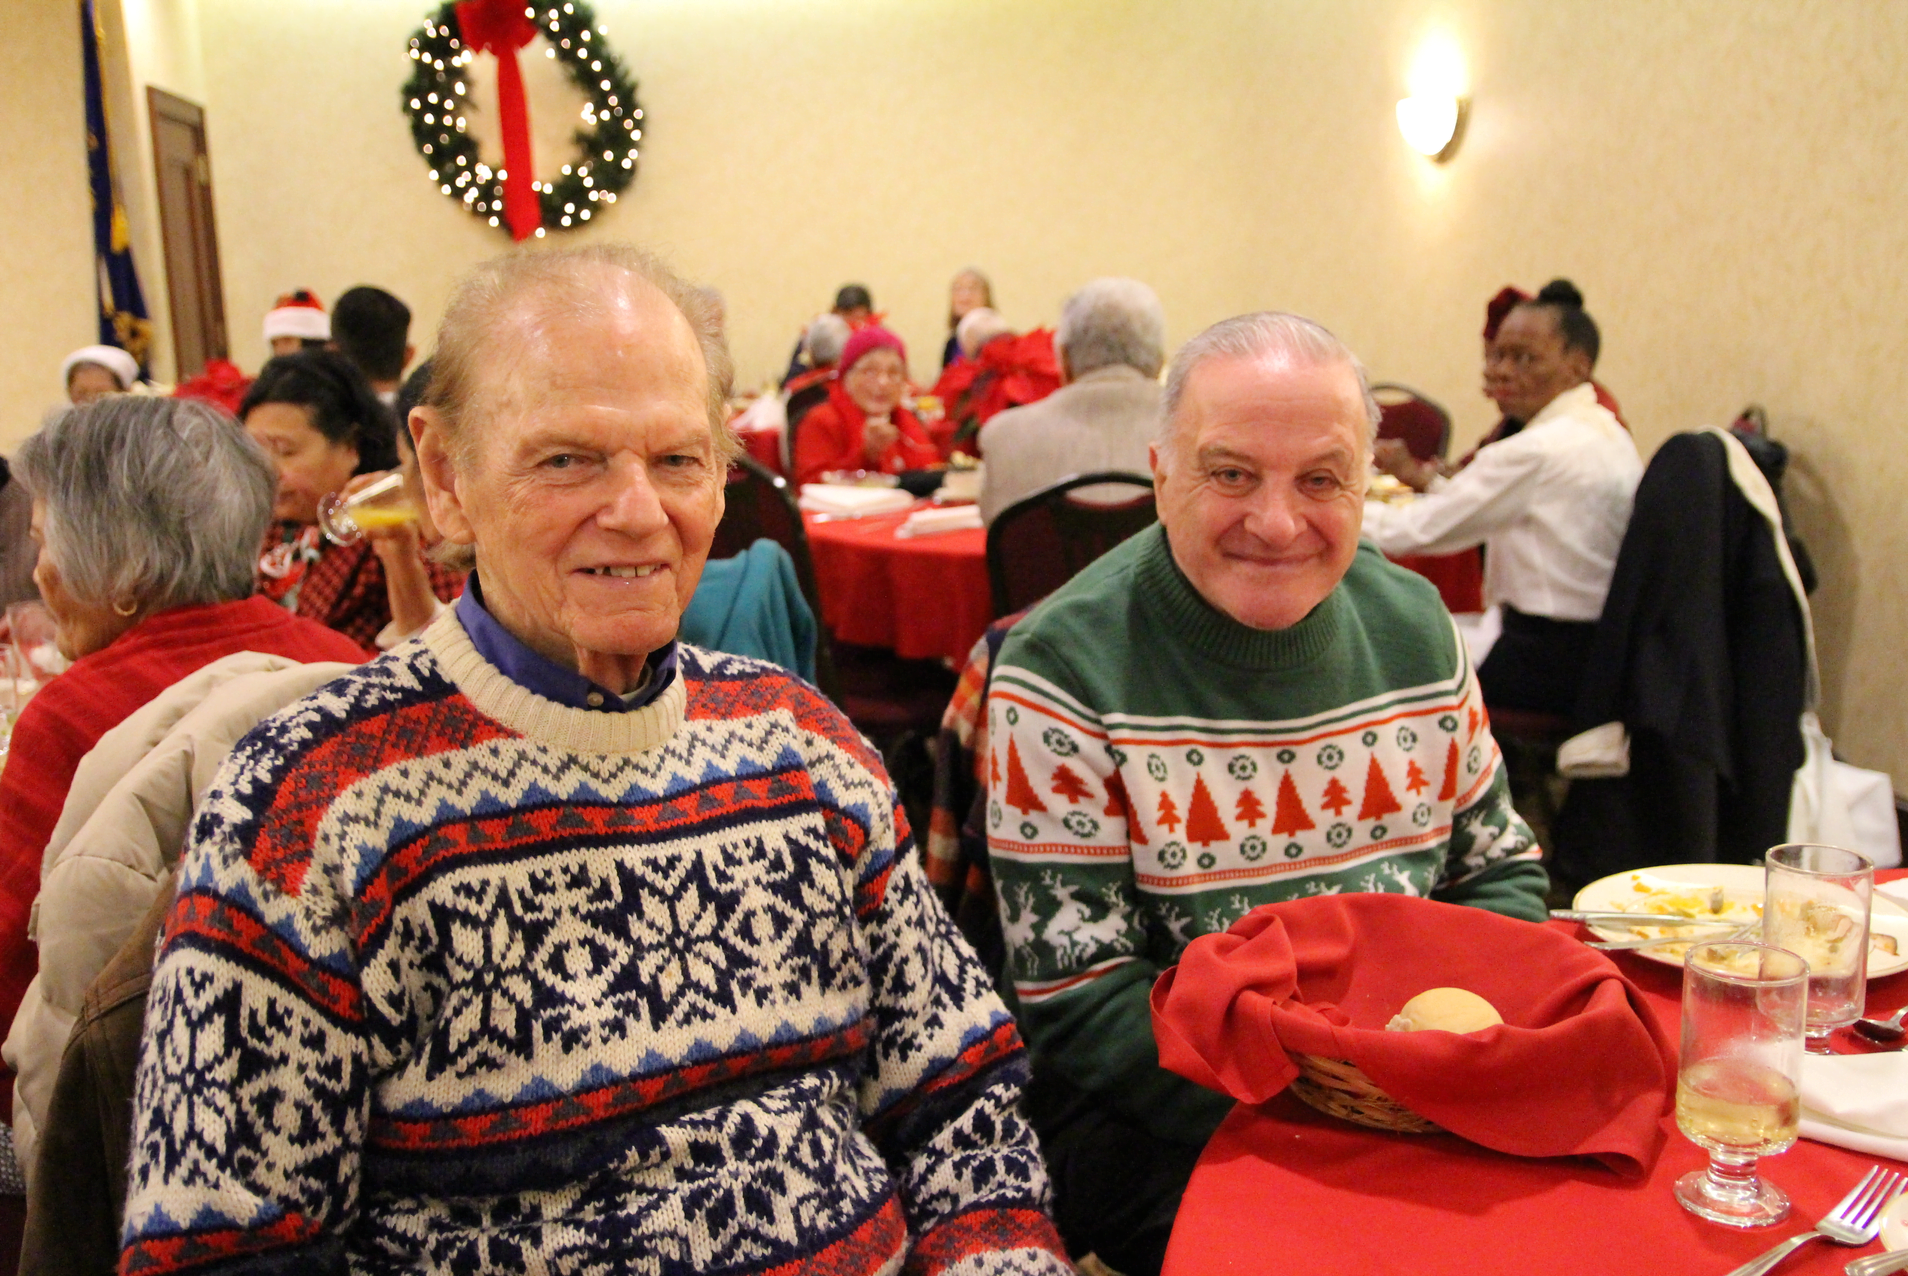 Lifelong Greenwich residences Richard Frenz and Early Coyne at the annual Christmas meal at the Kights of Columbus. Dec 25, 2017 Photo: Leslie Yager